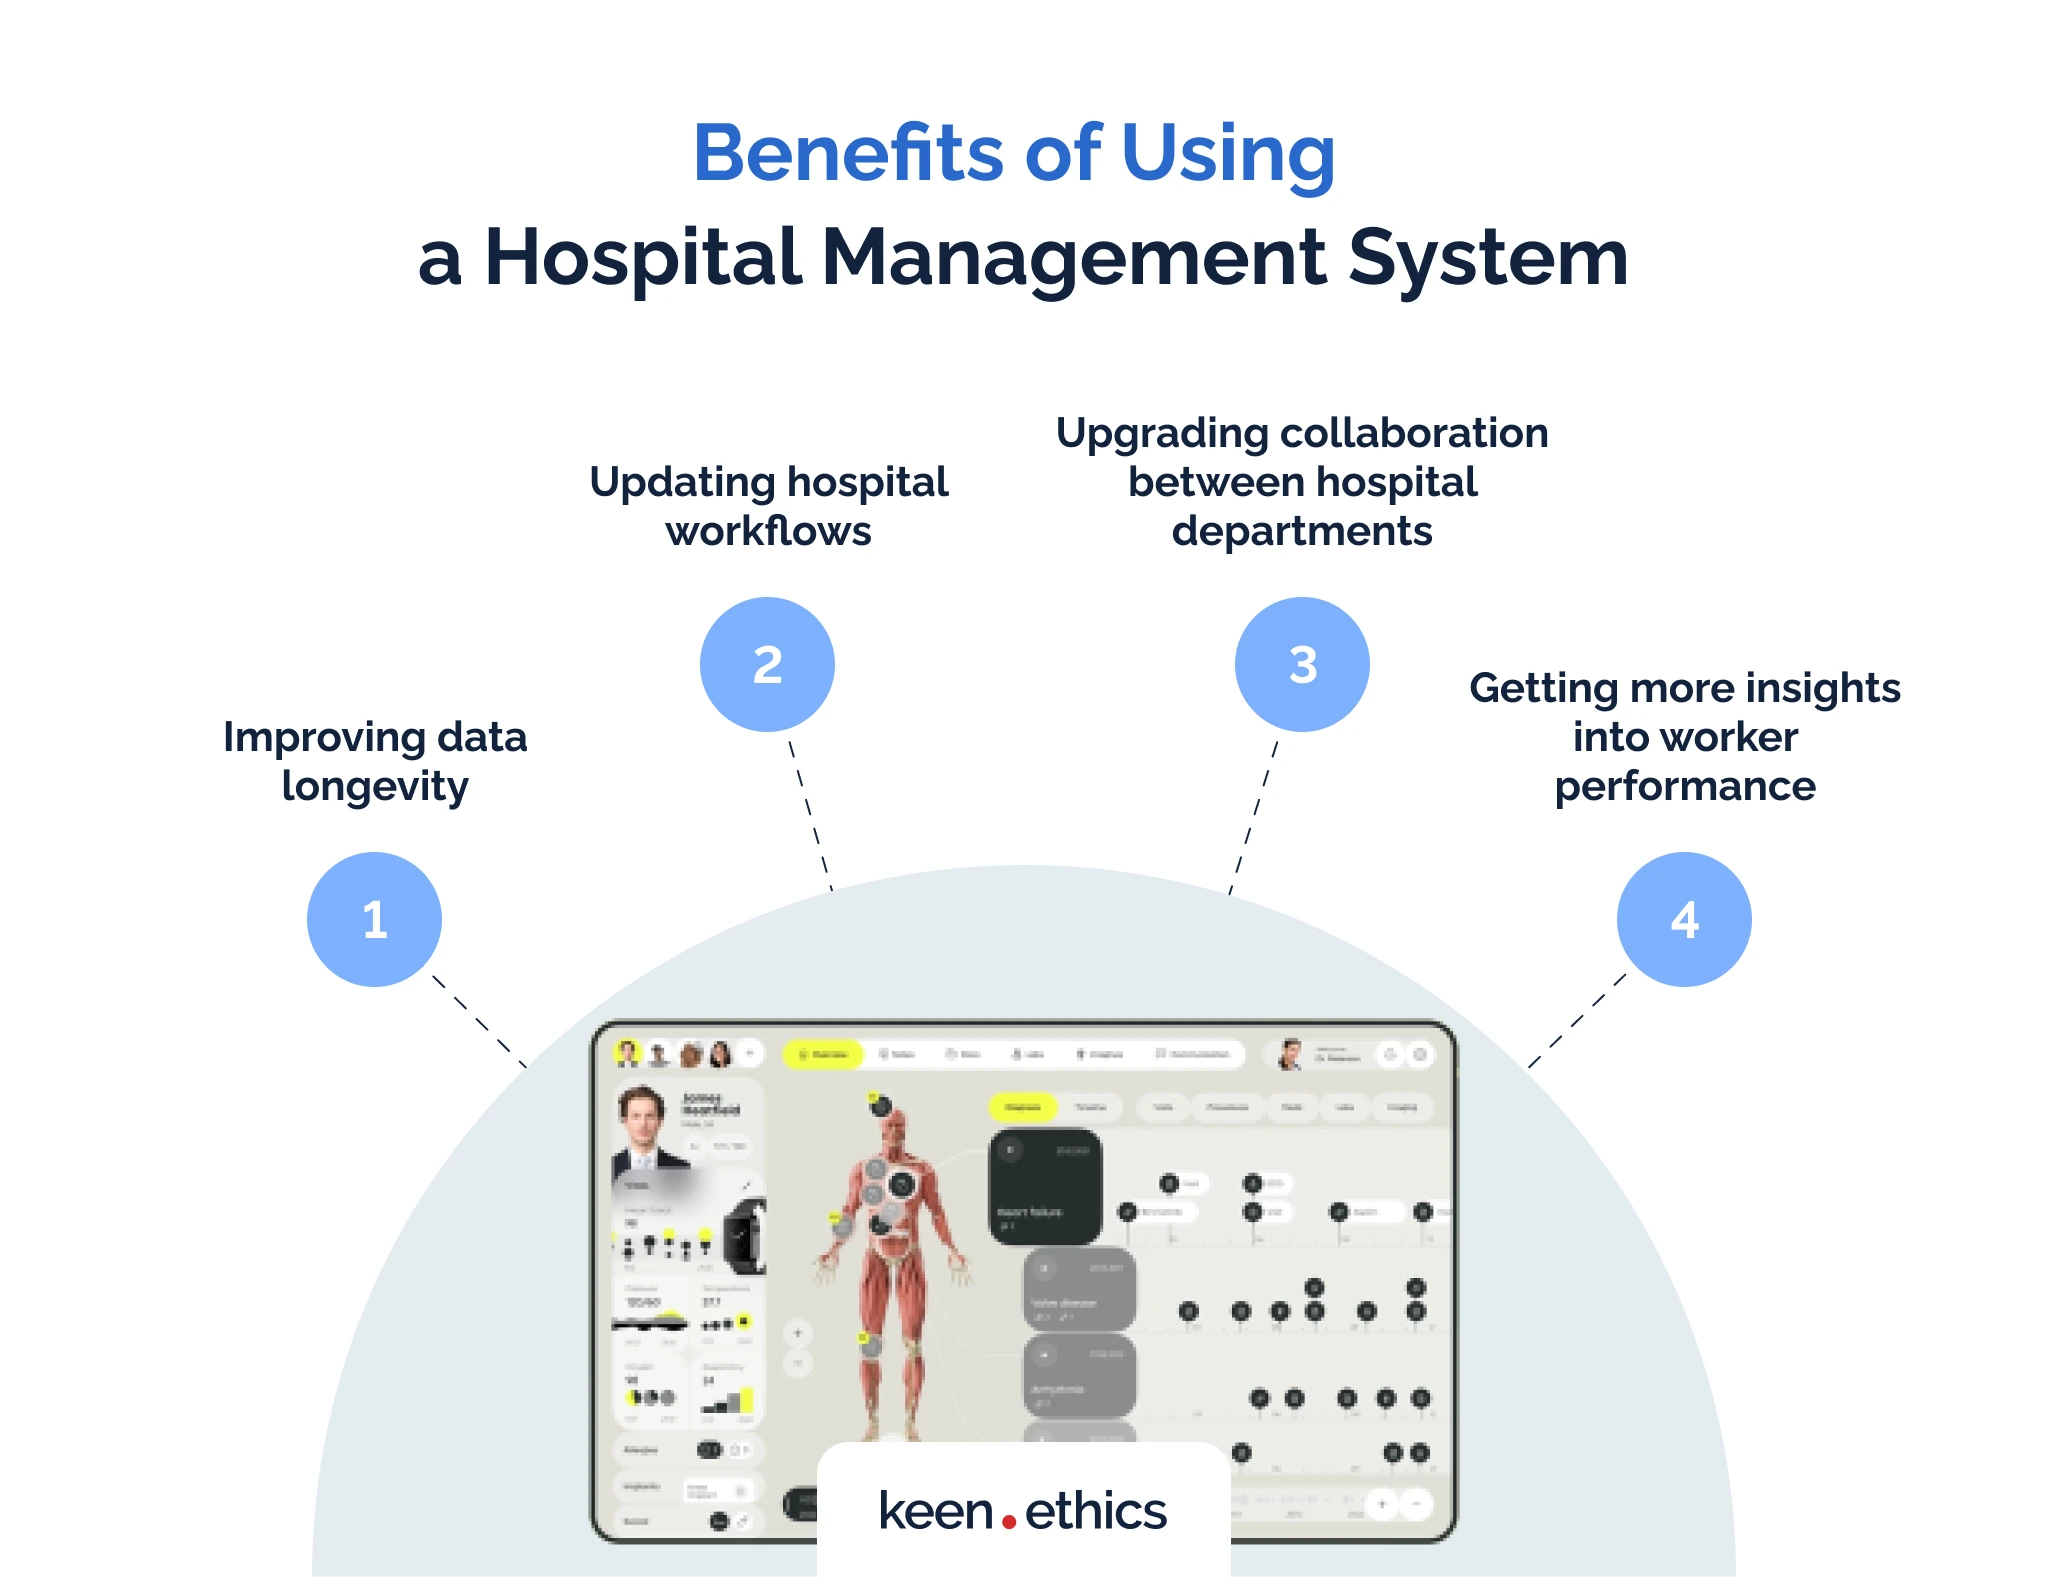 Benefits of using a hospital management system